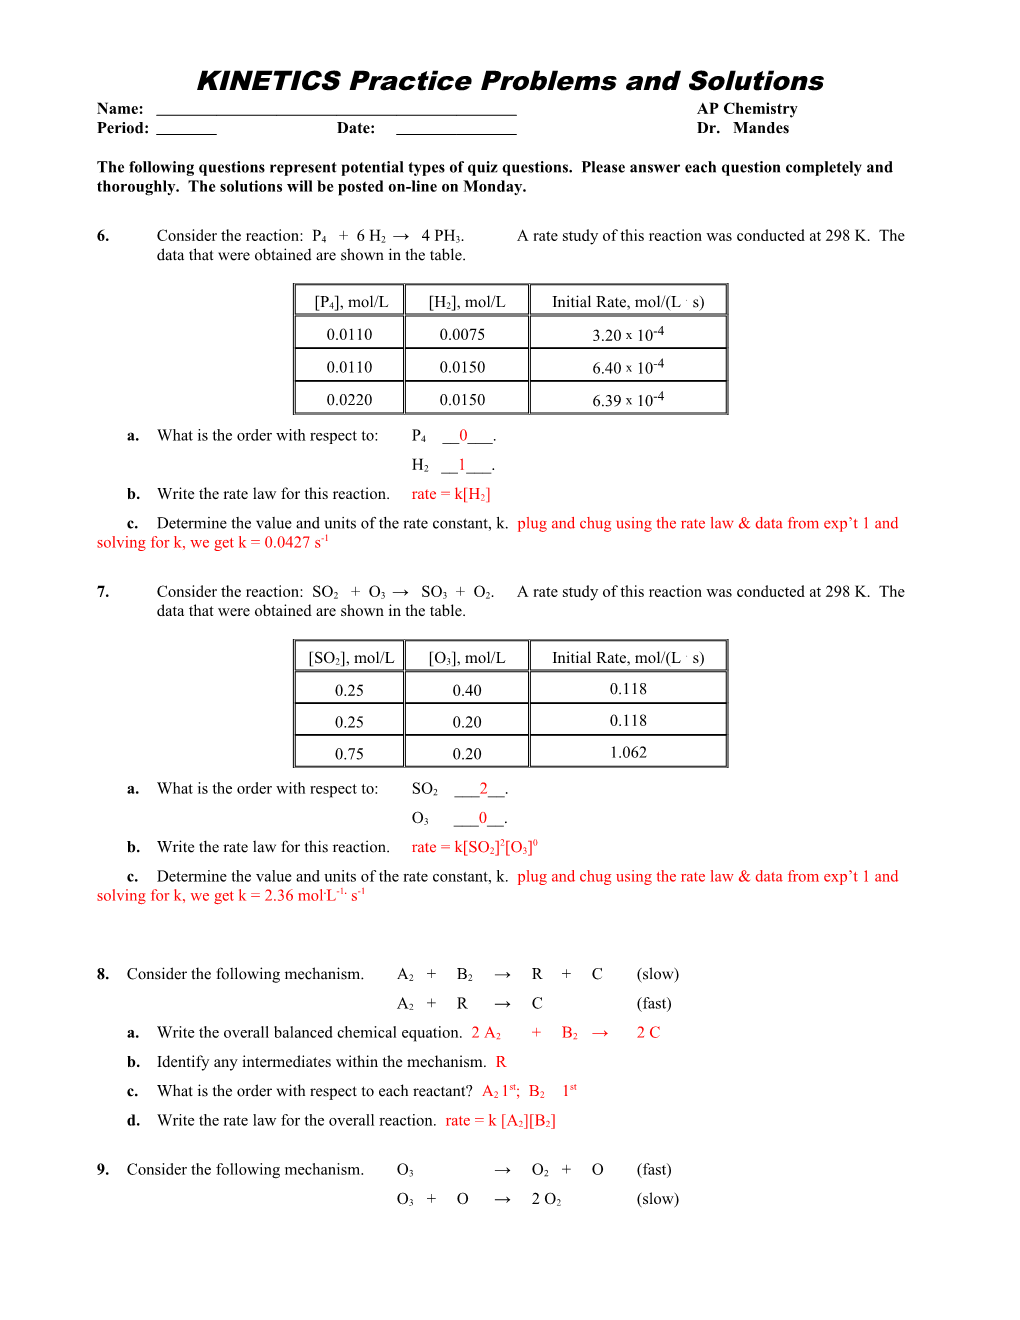 KINETICS Practice Problems and Solutions